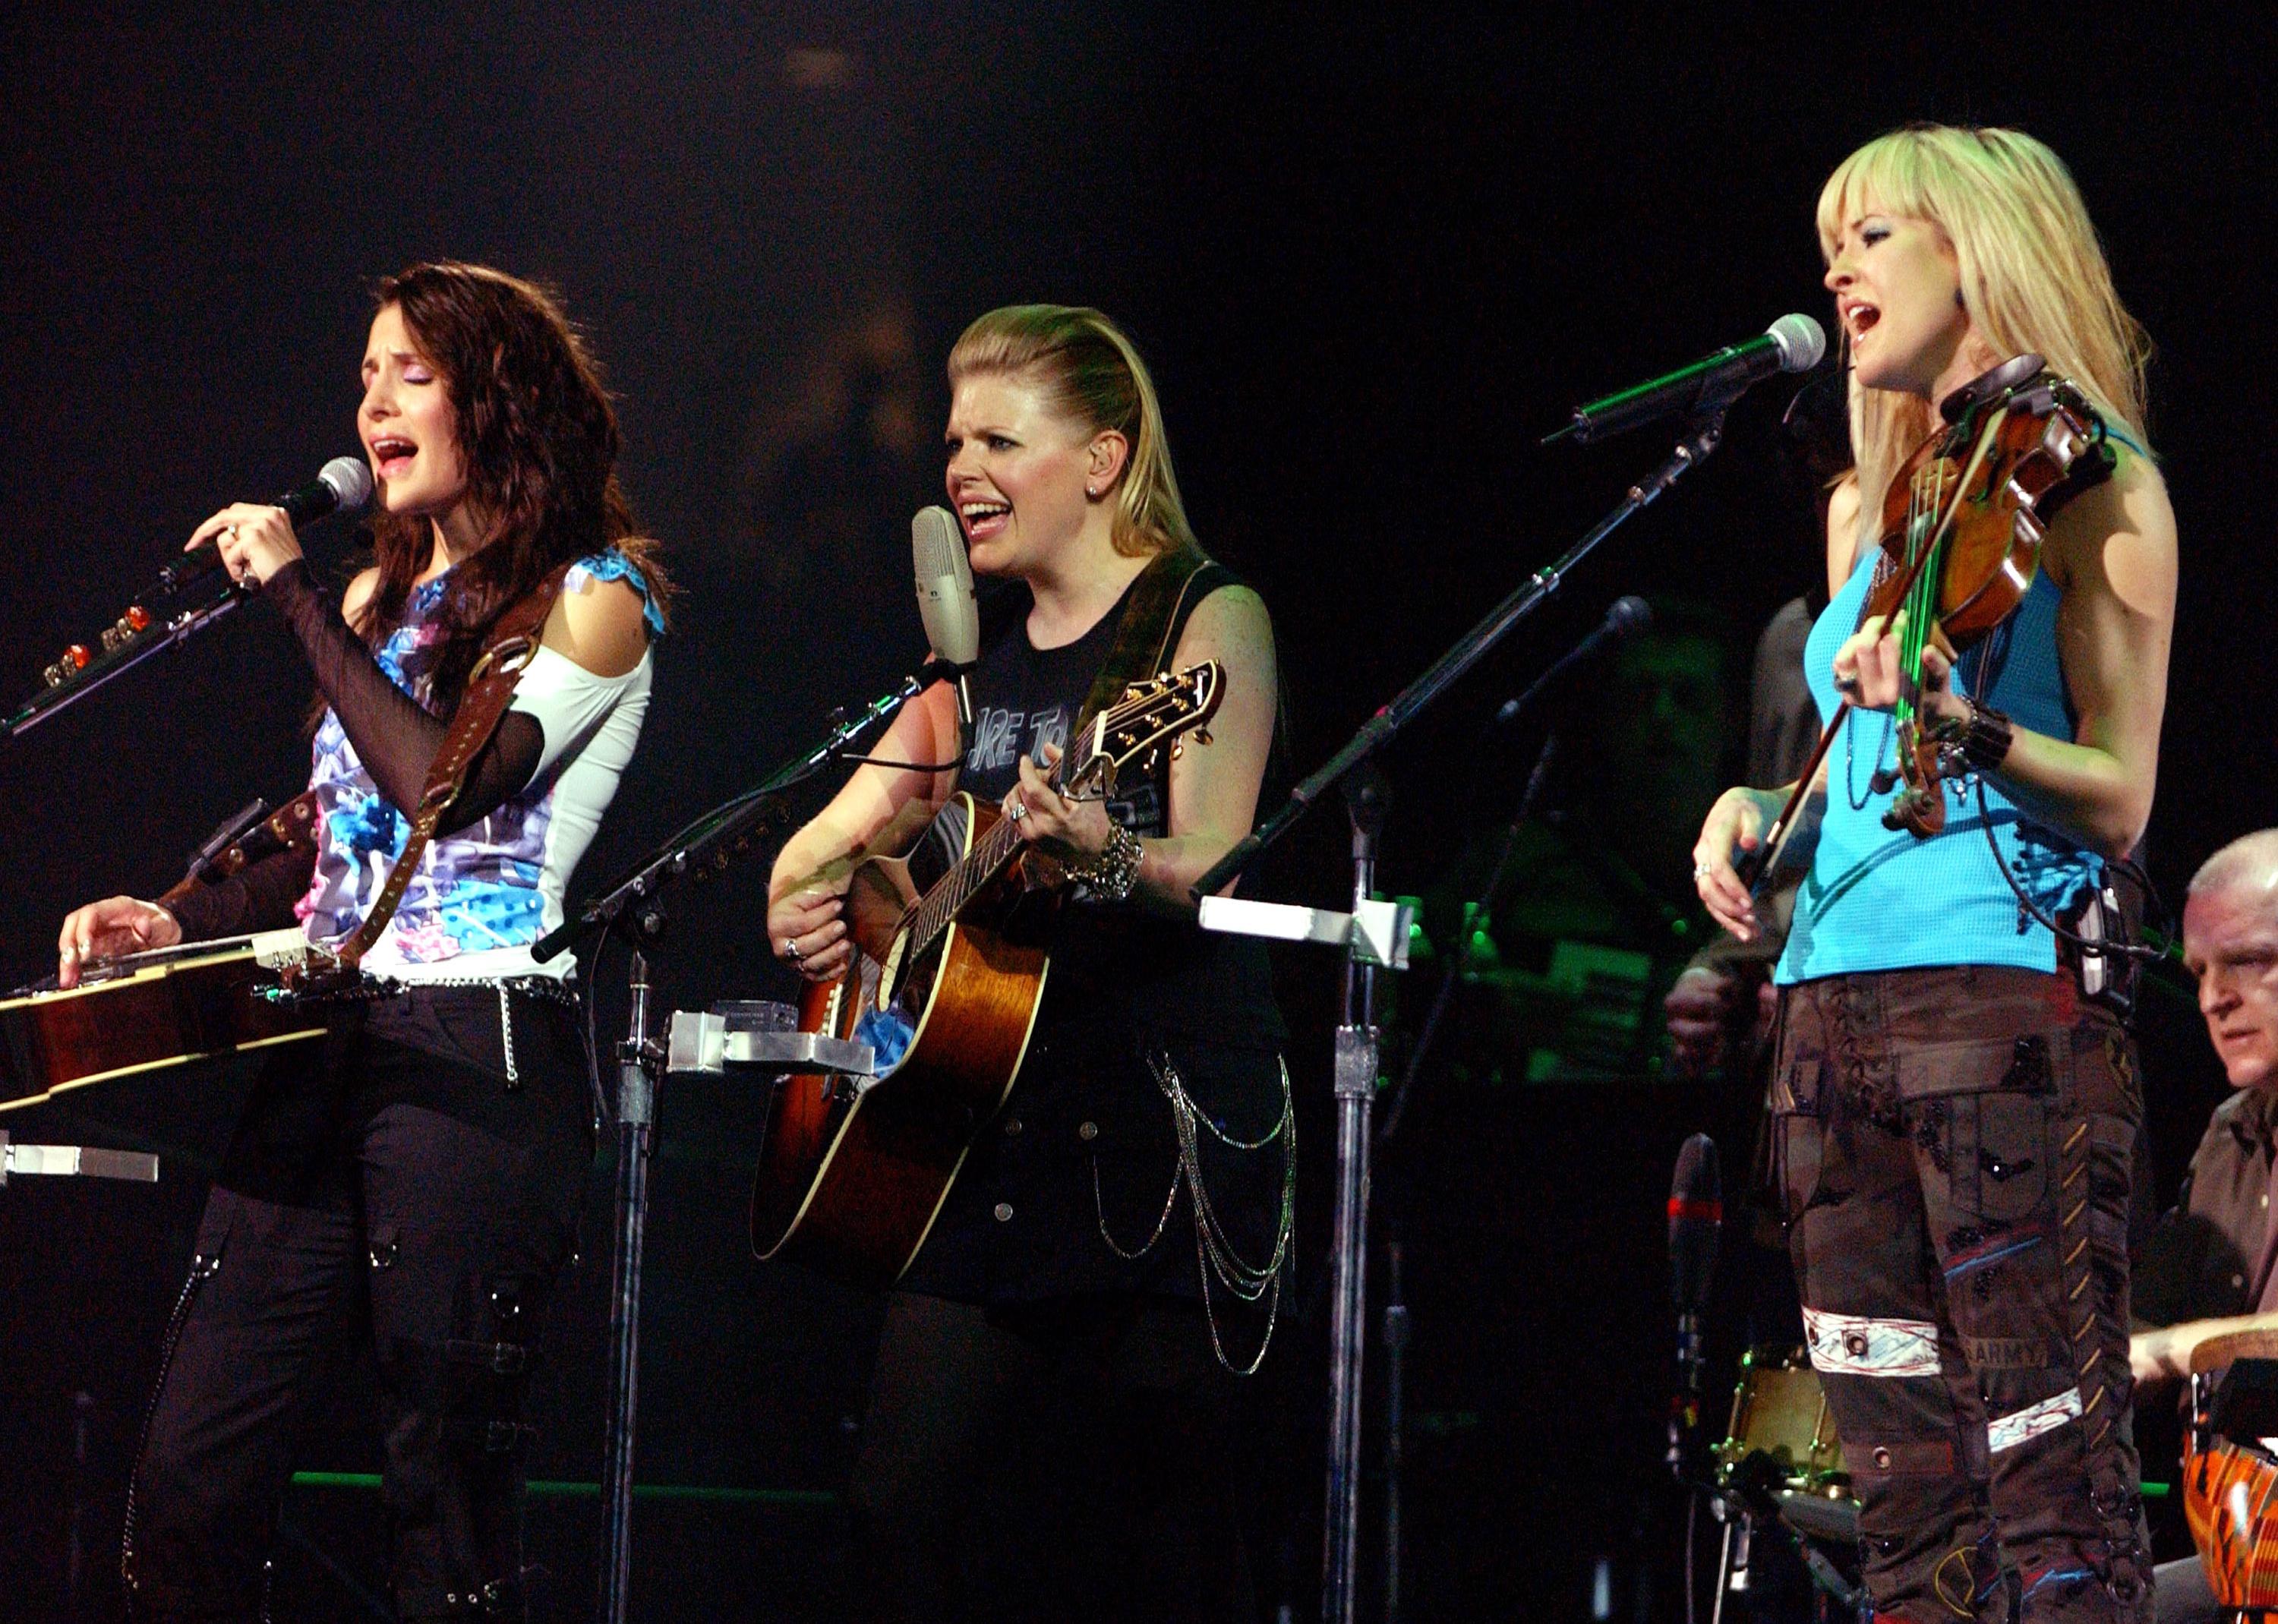 <p>This all-female country band was grappling with the <a href="https://theboot.com/natalie-maines-dixie-chicks-controversy/">backlash to their anti-war comments</a> when they kicked off a 2003 world tour. In spite of the controversy, it was the top-grossing <a href="https://celebrityaccess.com/caarchive/touring-festival-news-dixie-chicks-gross-61-million-on-north-american-tour-ben-jerrys-one-world-heart-festival-canceled-click-on-more-to-view-all-articles/">country tour of the year</a>. Opening acts included Joan Osborne and Michelle Branch, respectively.</p>